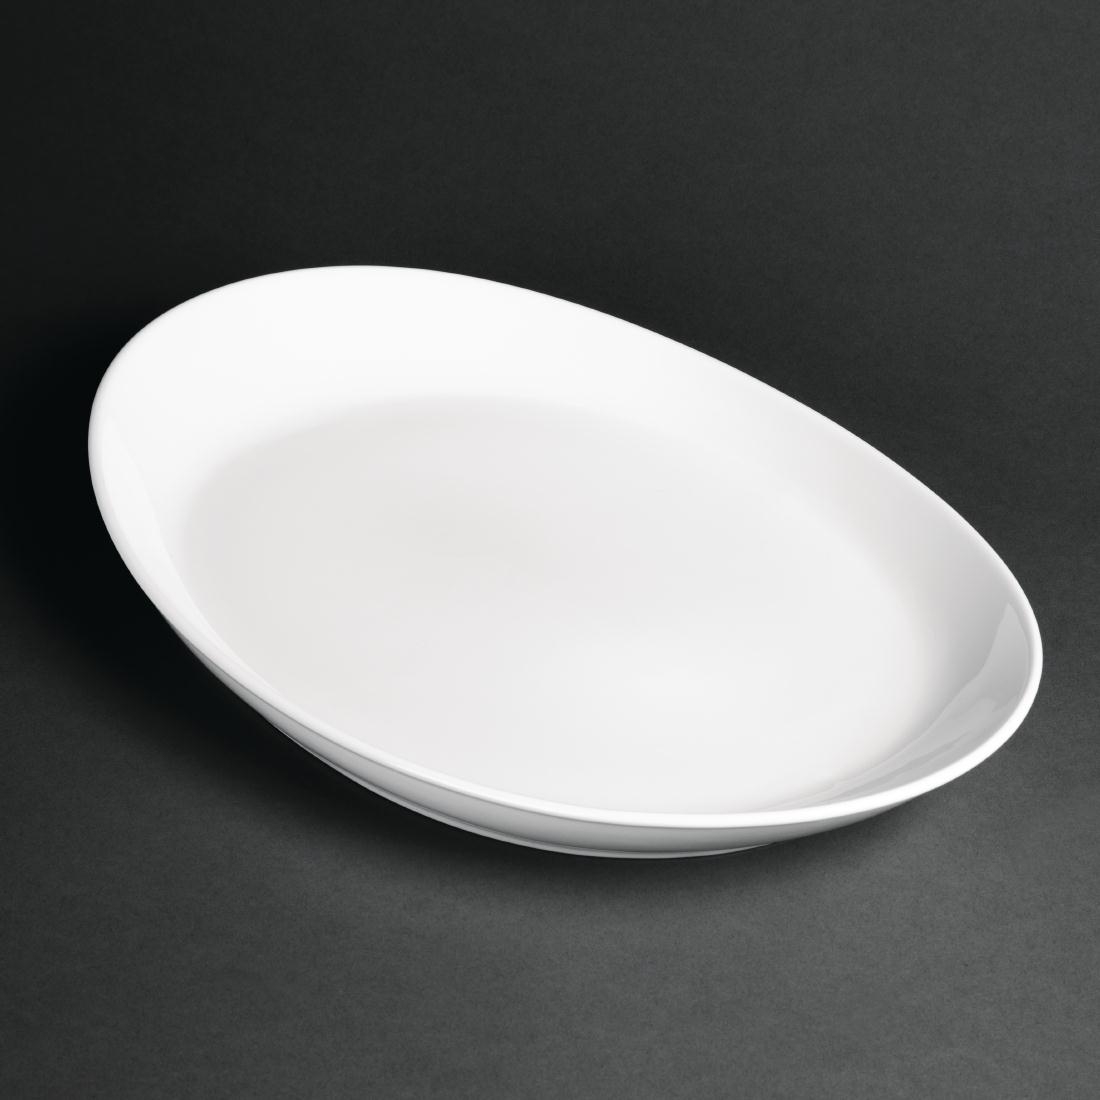 Royal Porcelain Classic White Oval Plates 340mm